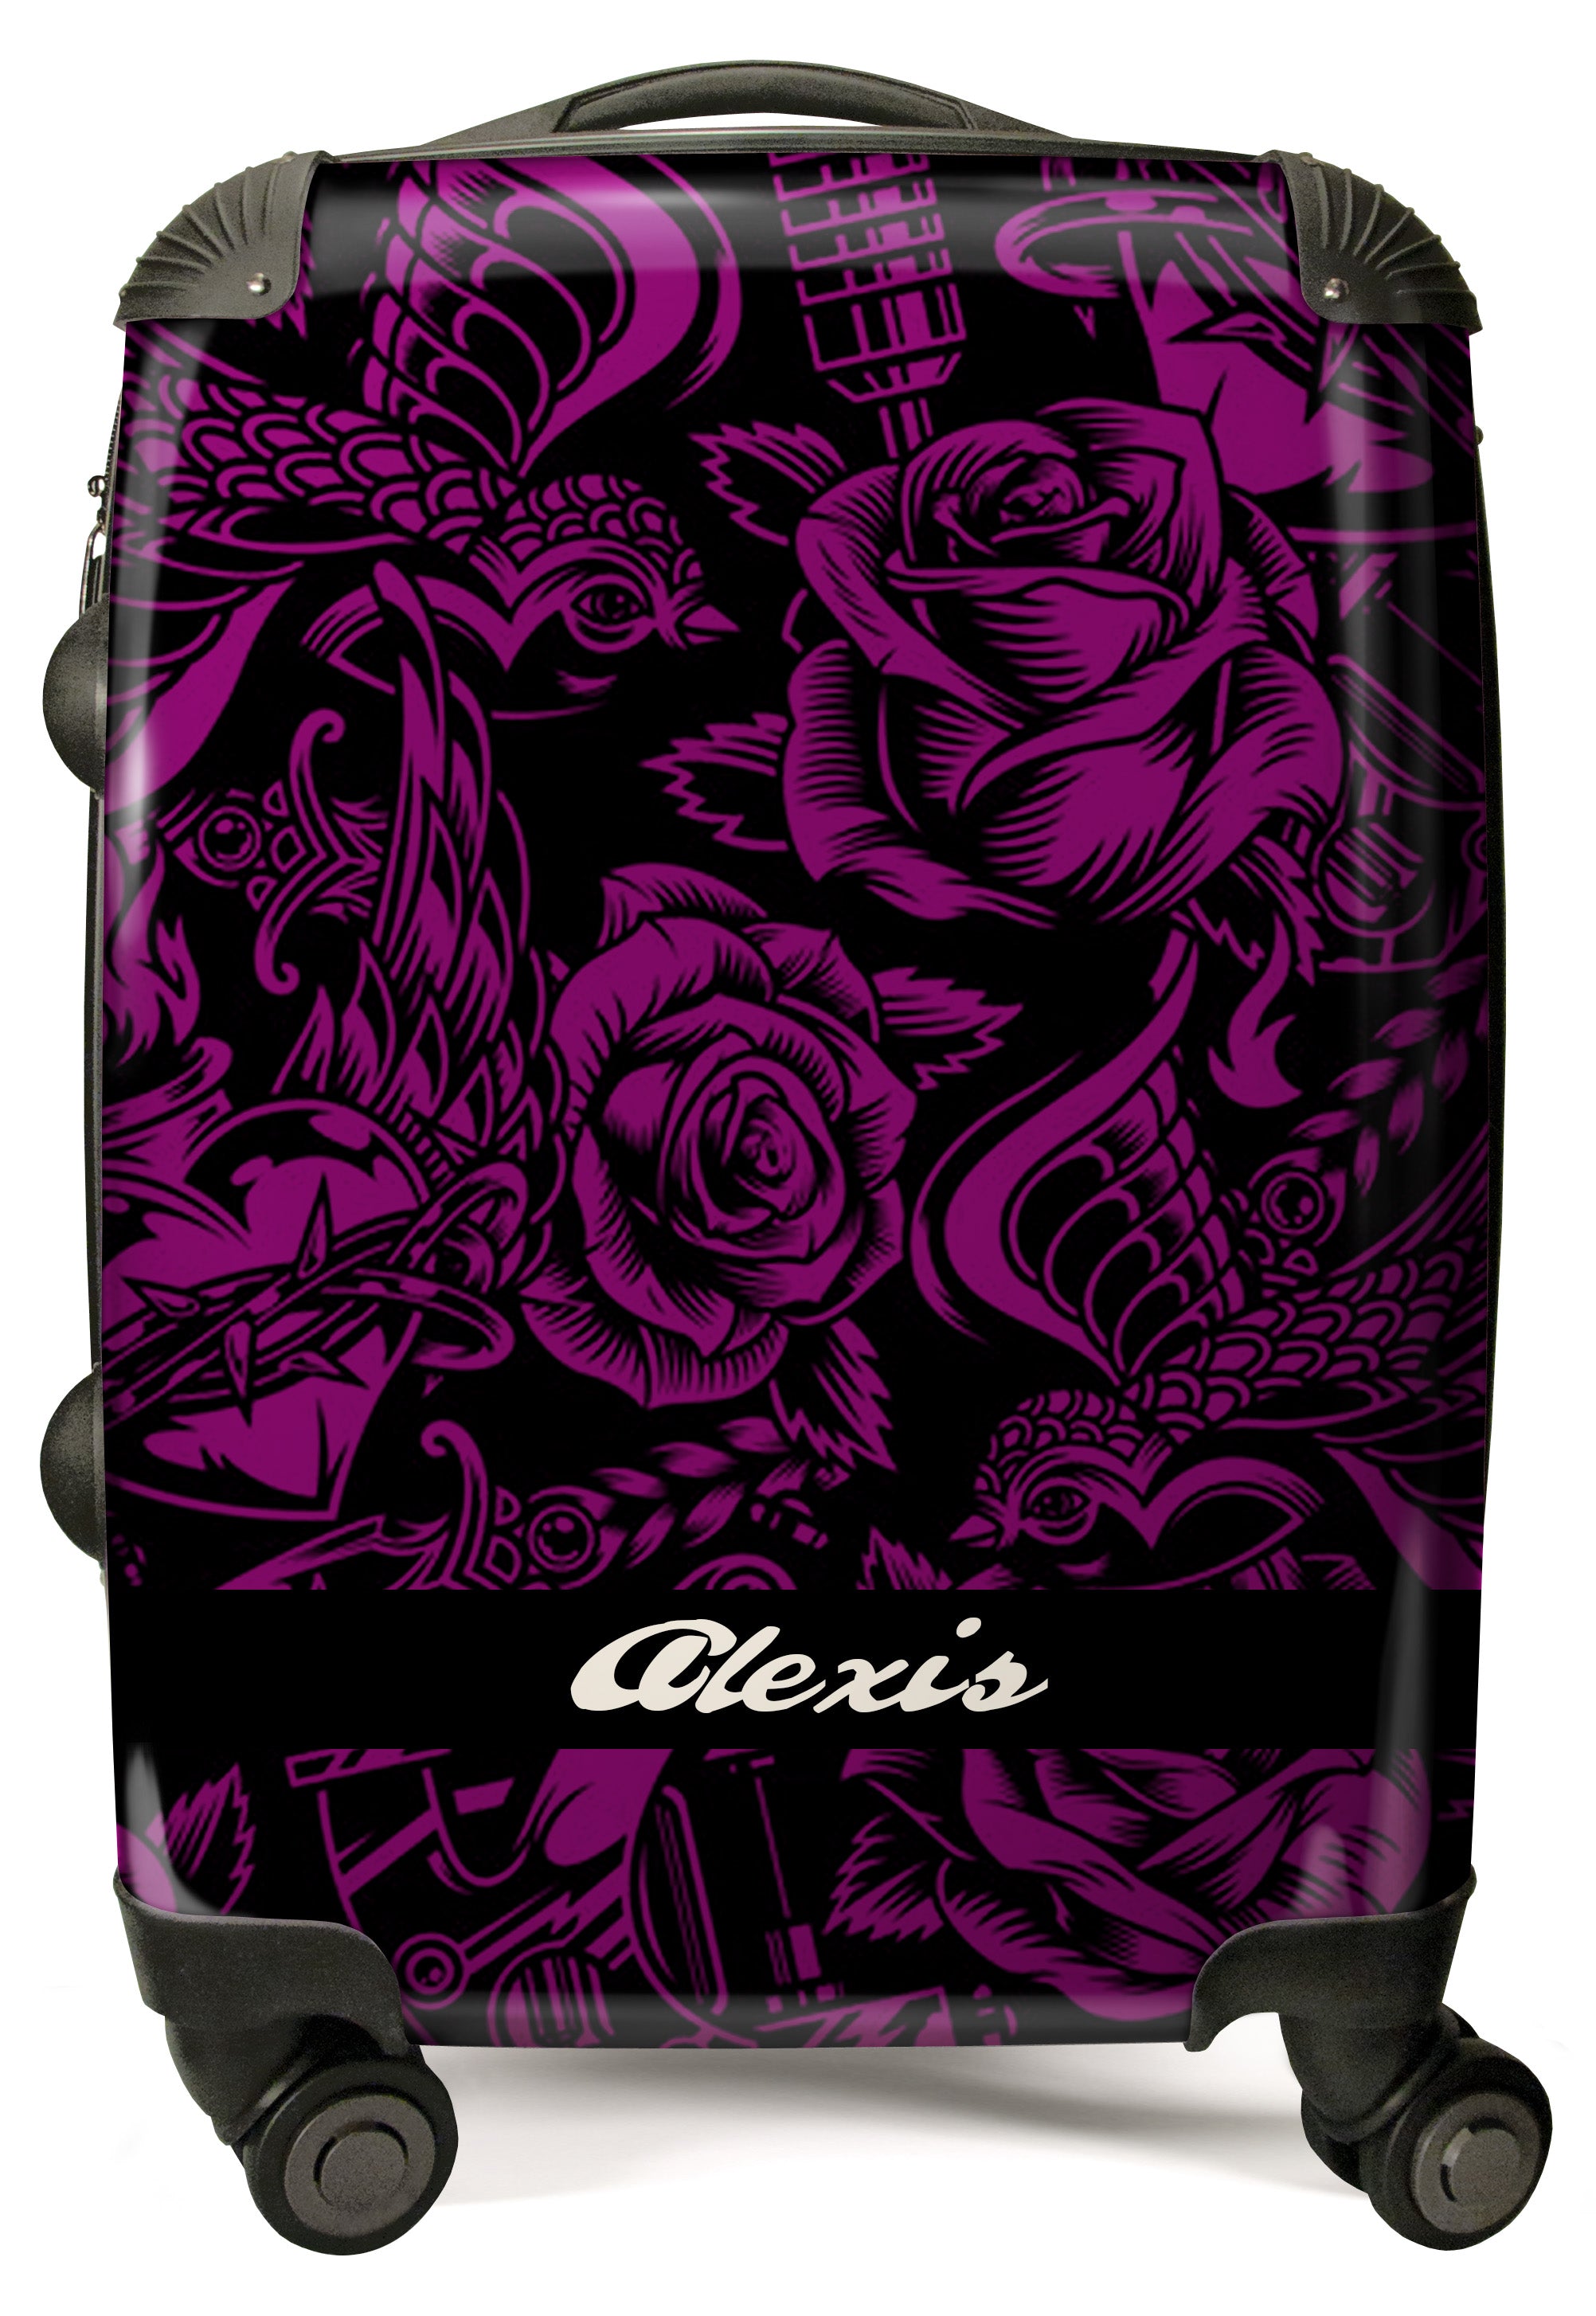 PERSONALIZED PINK ROSE PRINT NAME SUITCASE